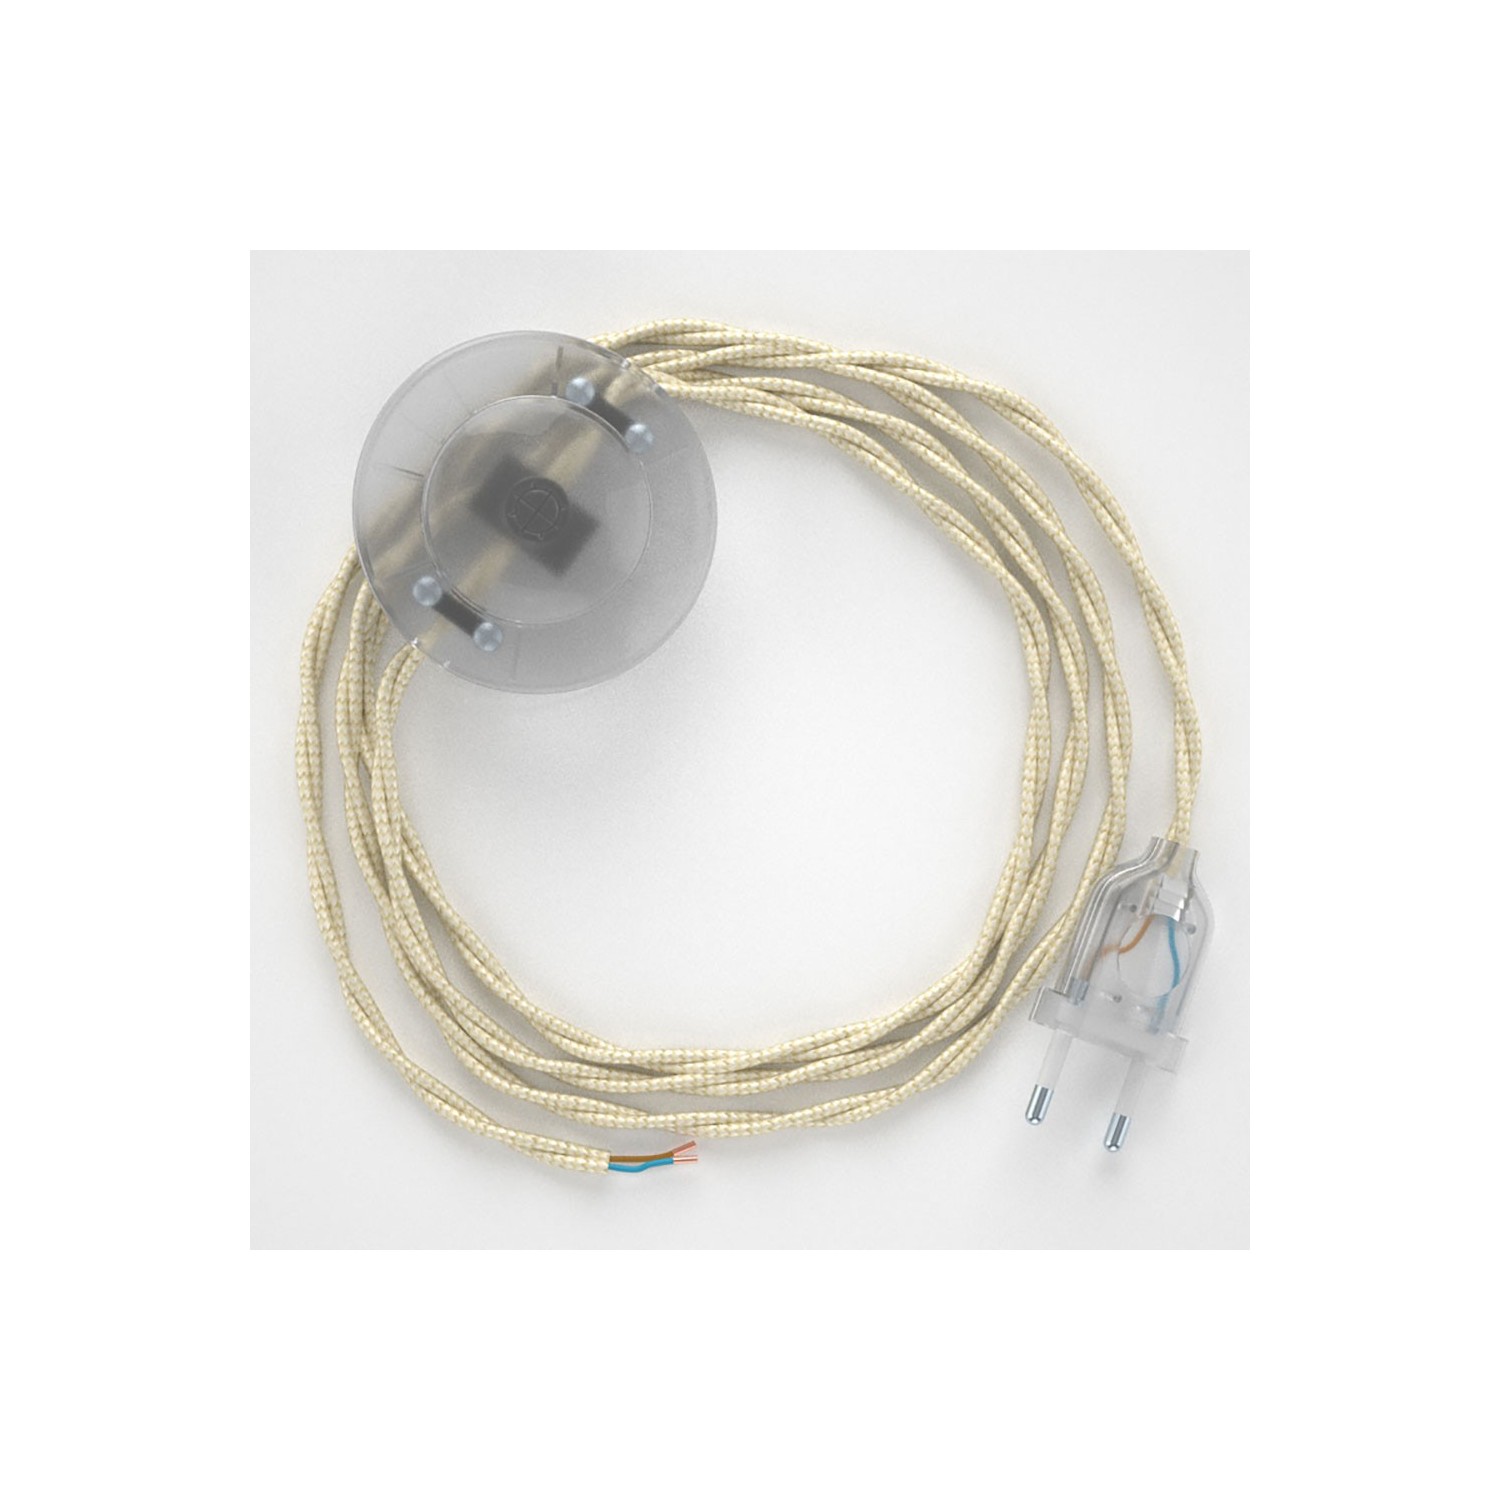 Wiring Pedestal, TM00 Ivory Rayon 3 m. Choose the colour of the switch and plug.